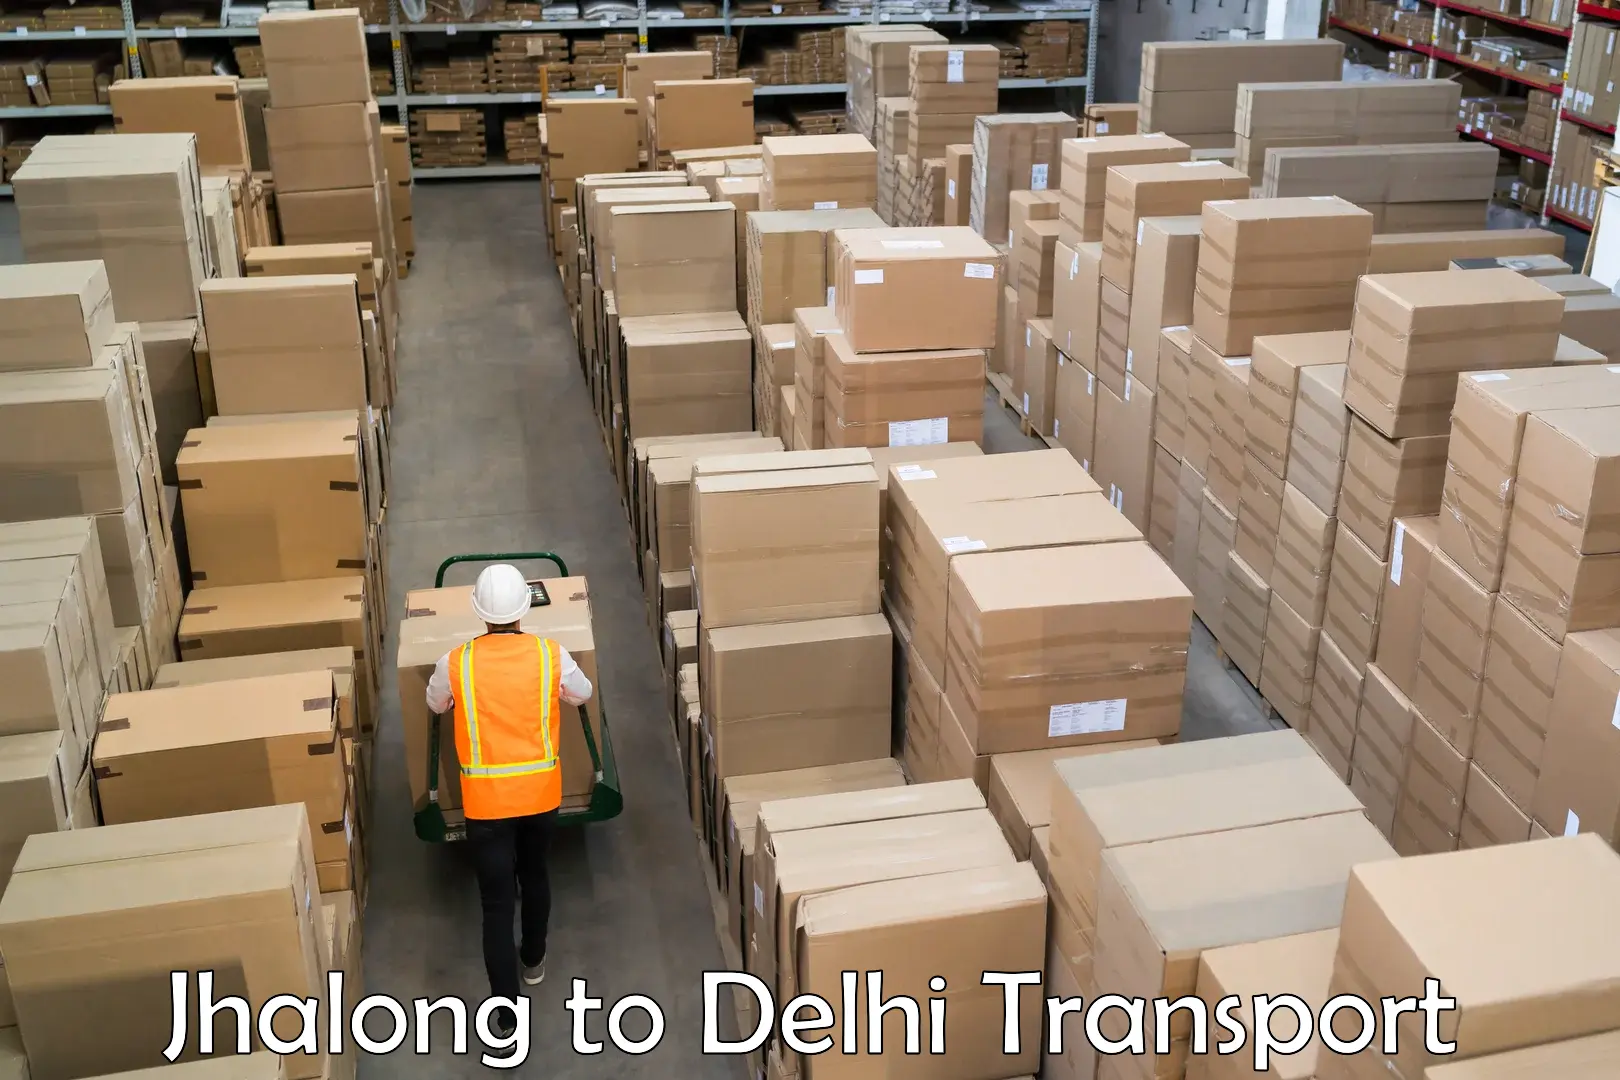 Nationwide transport services Jhalong to Delhi